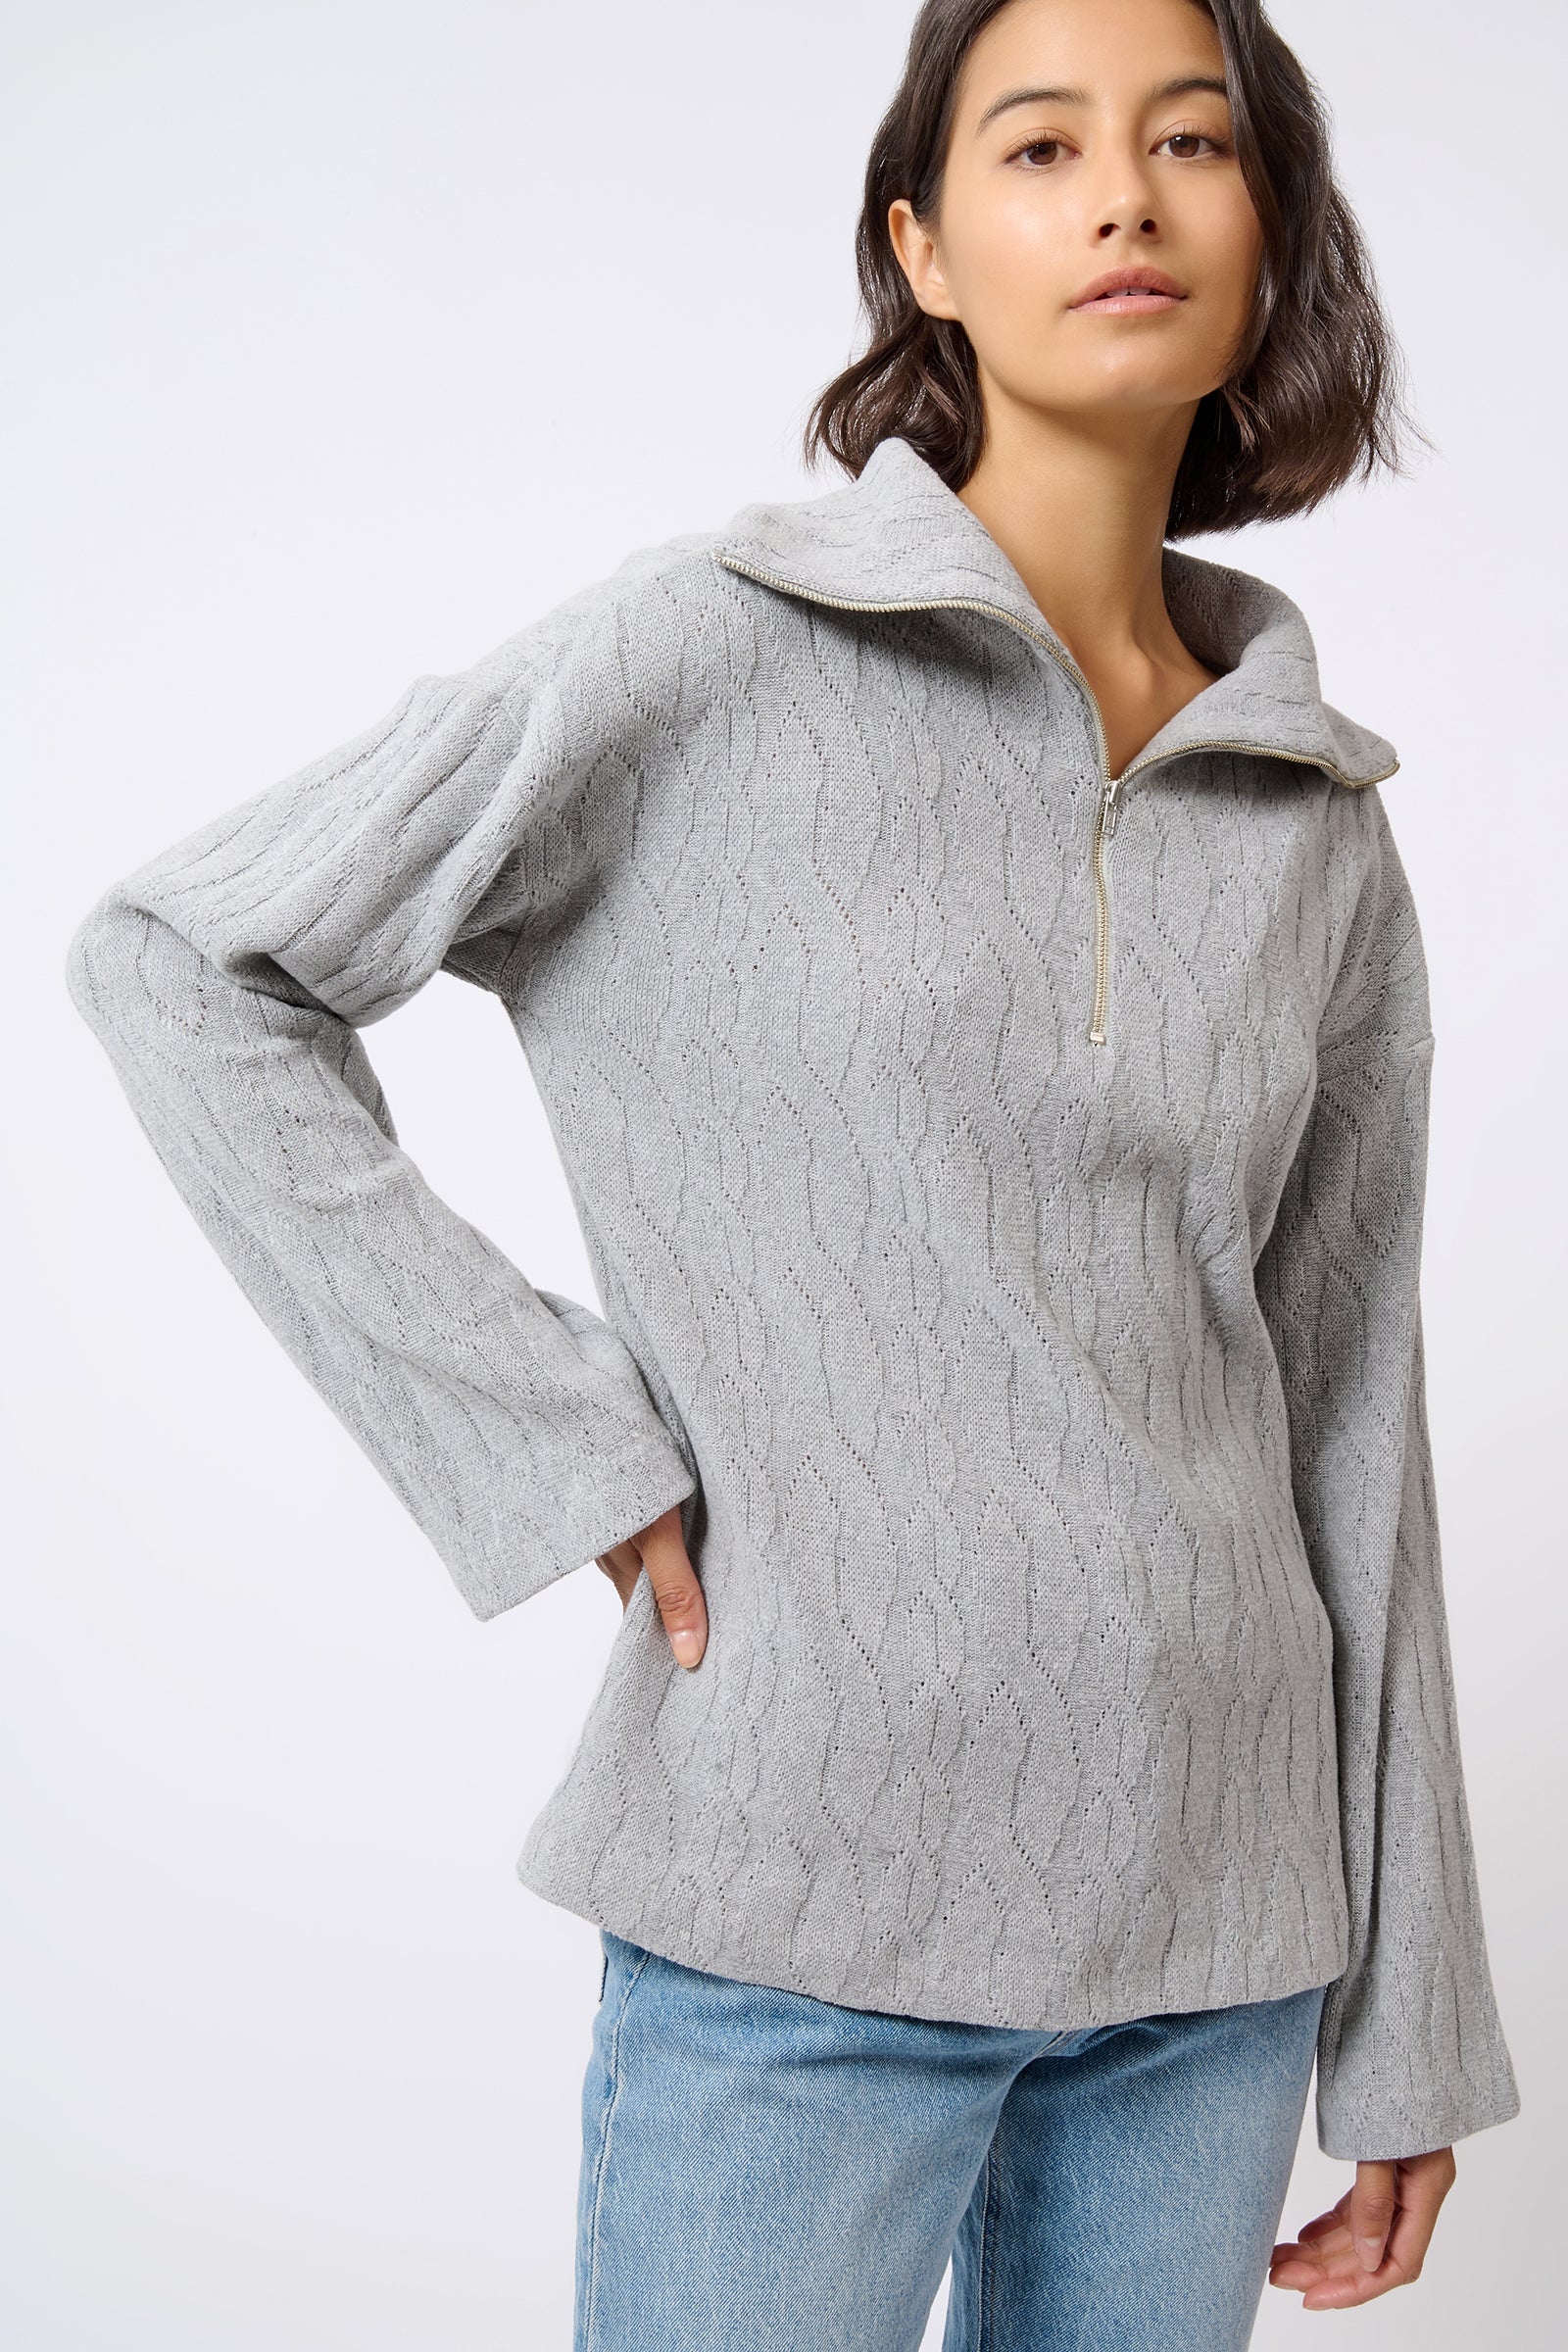 Kal Rieman Sandra Collared Zip Pullover Cable Knit in Grey on Model with Hand on Hip Front View